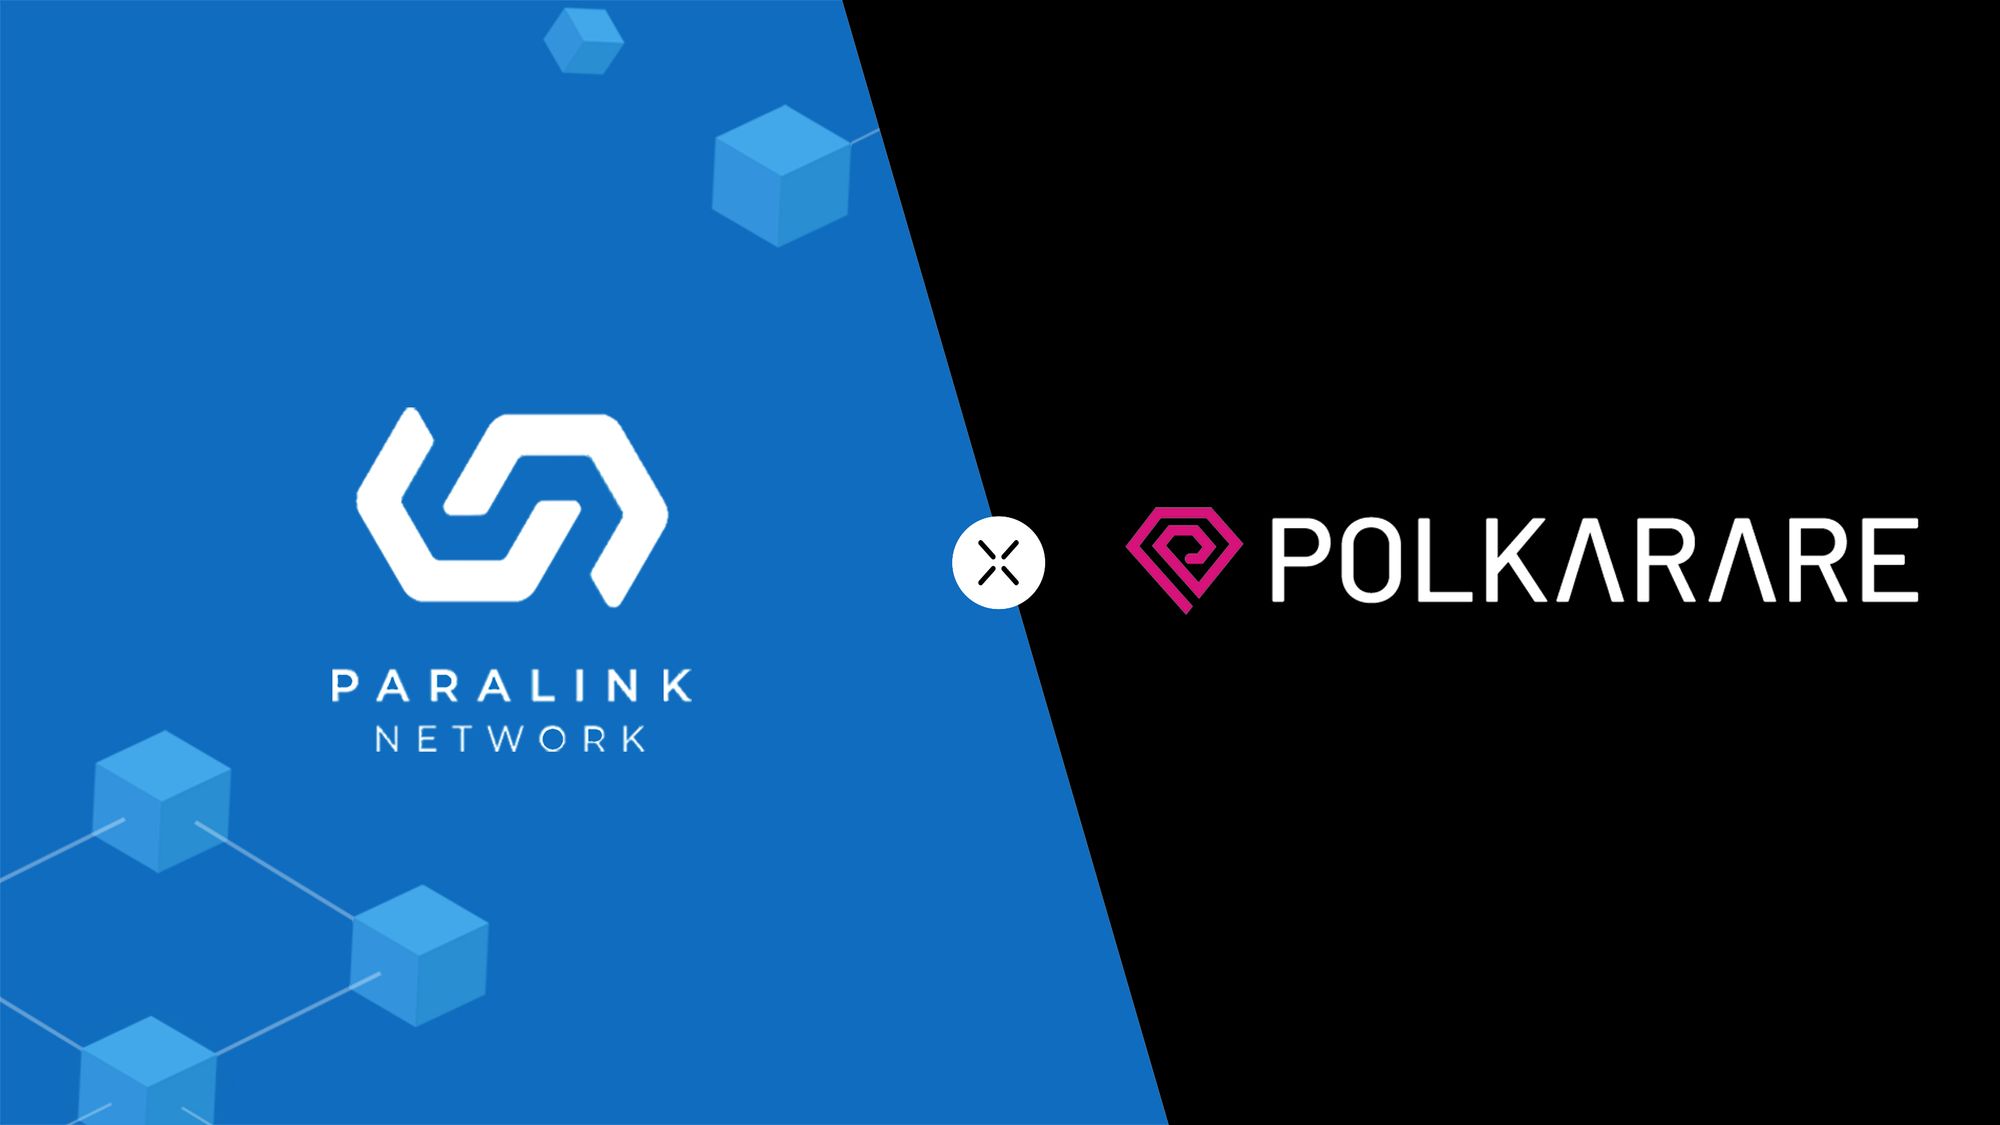 Paralink Network enters into a partnership to integrate multi-chain oracles into Polkarare’s NFT platform!